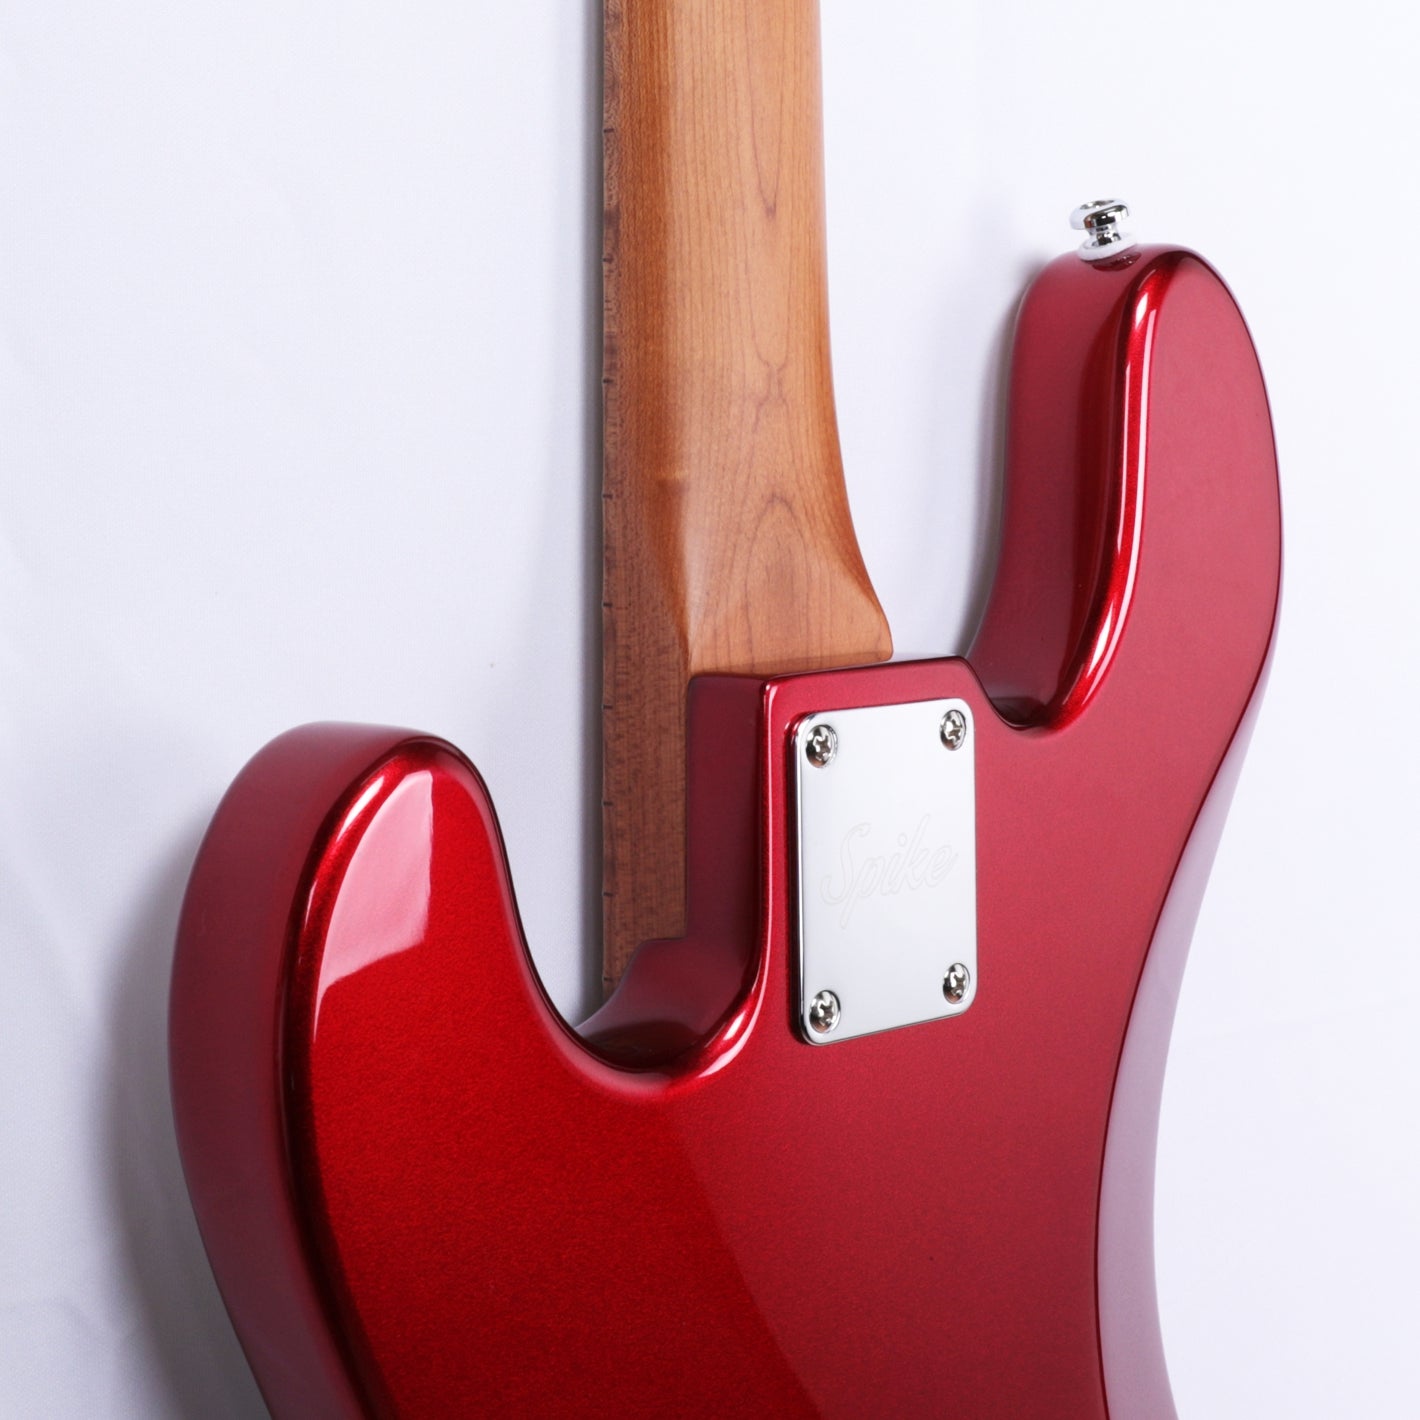 Tribe Shob Bass Active - Candy Apple Red